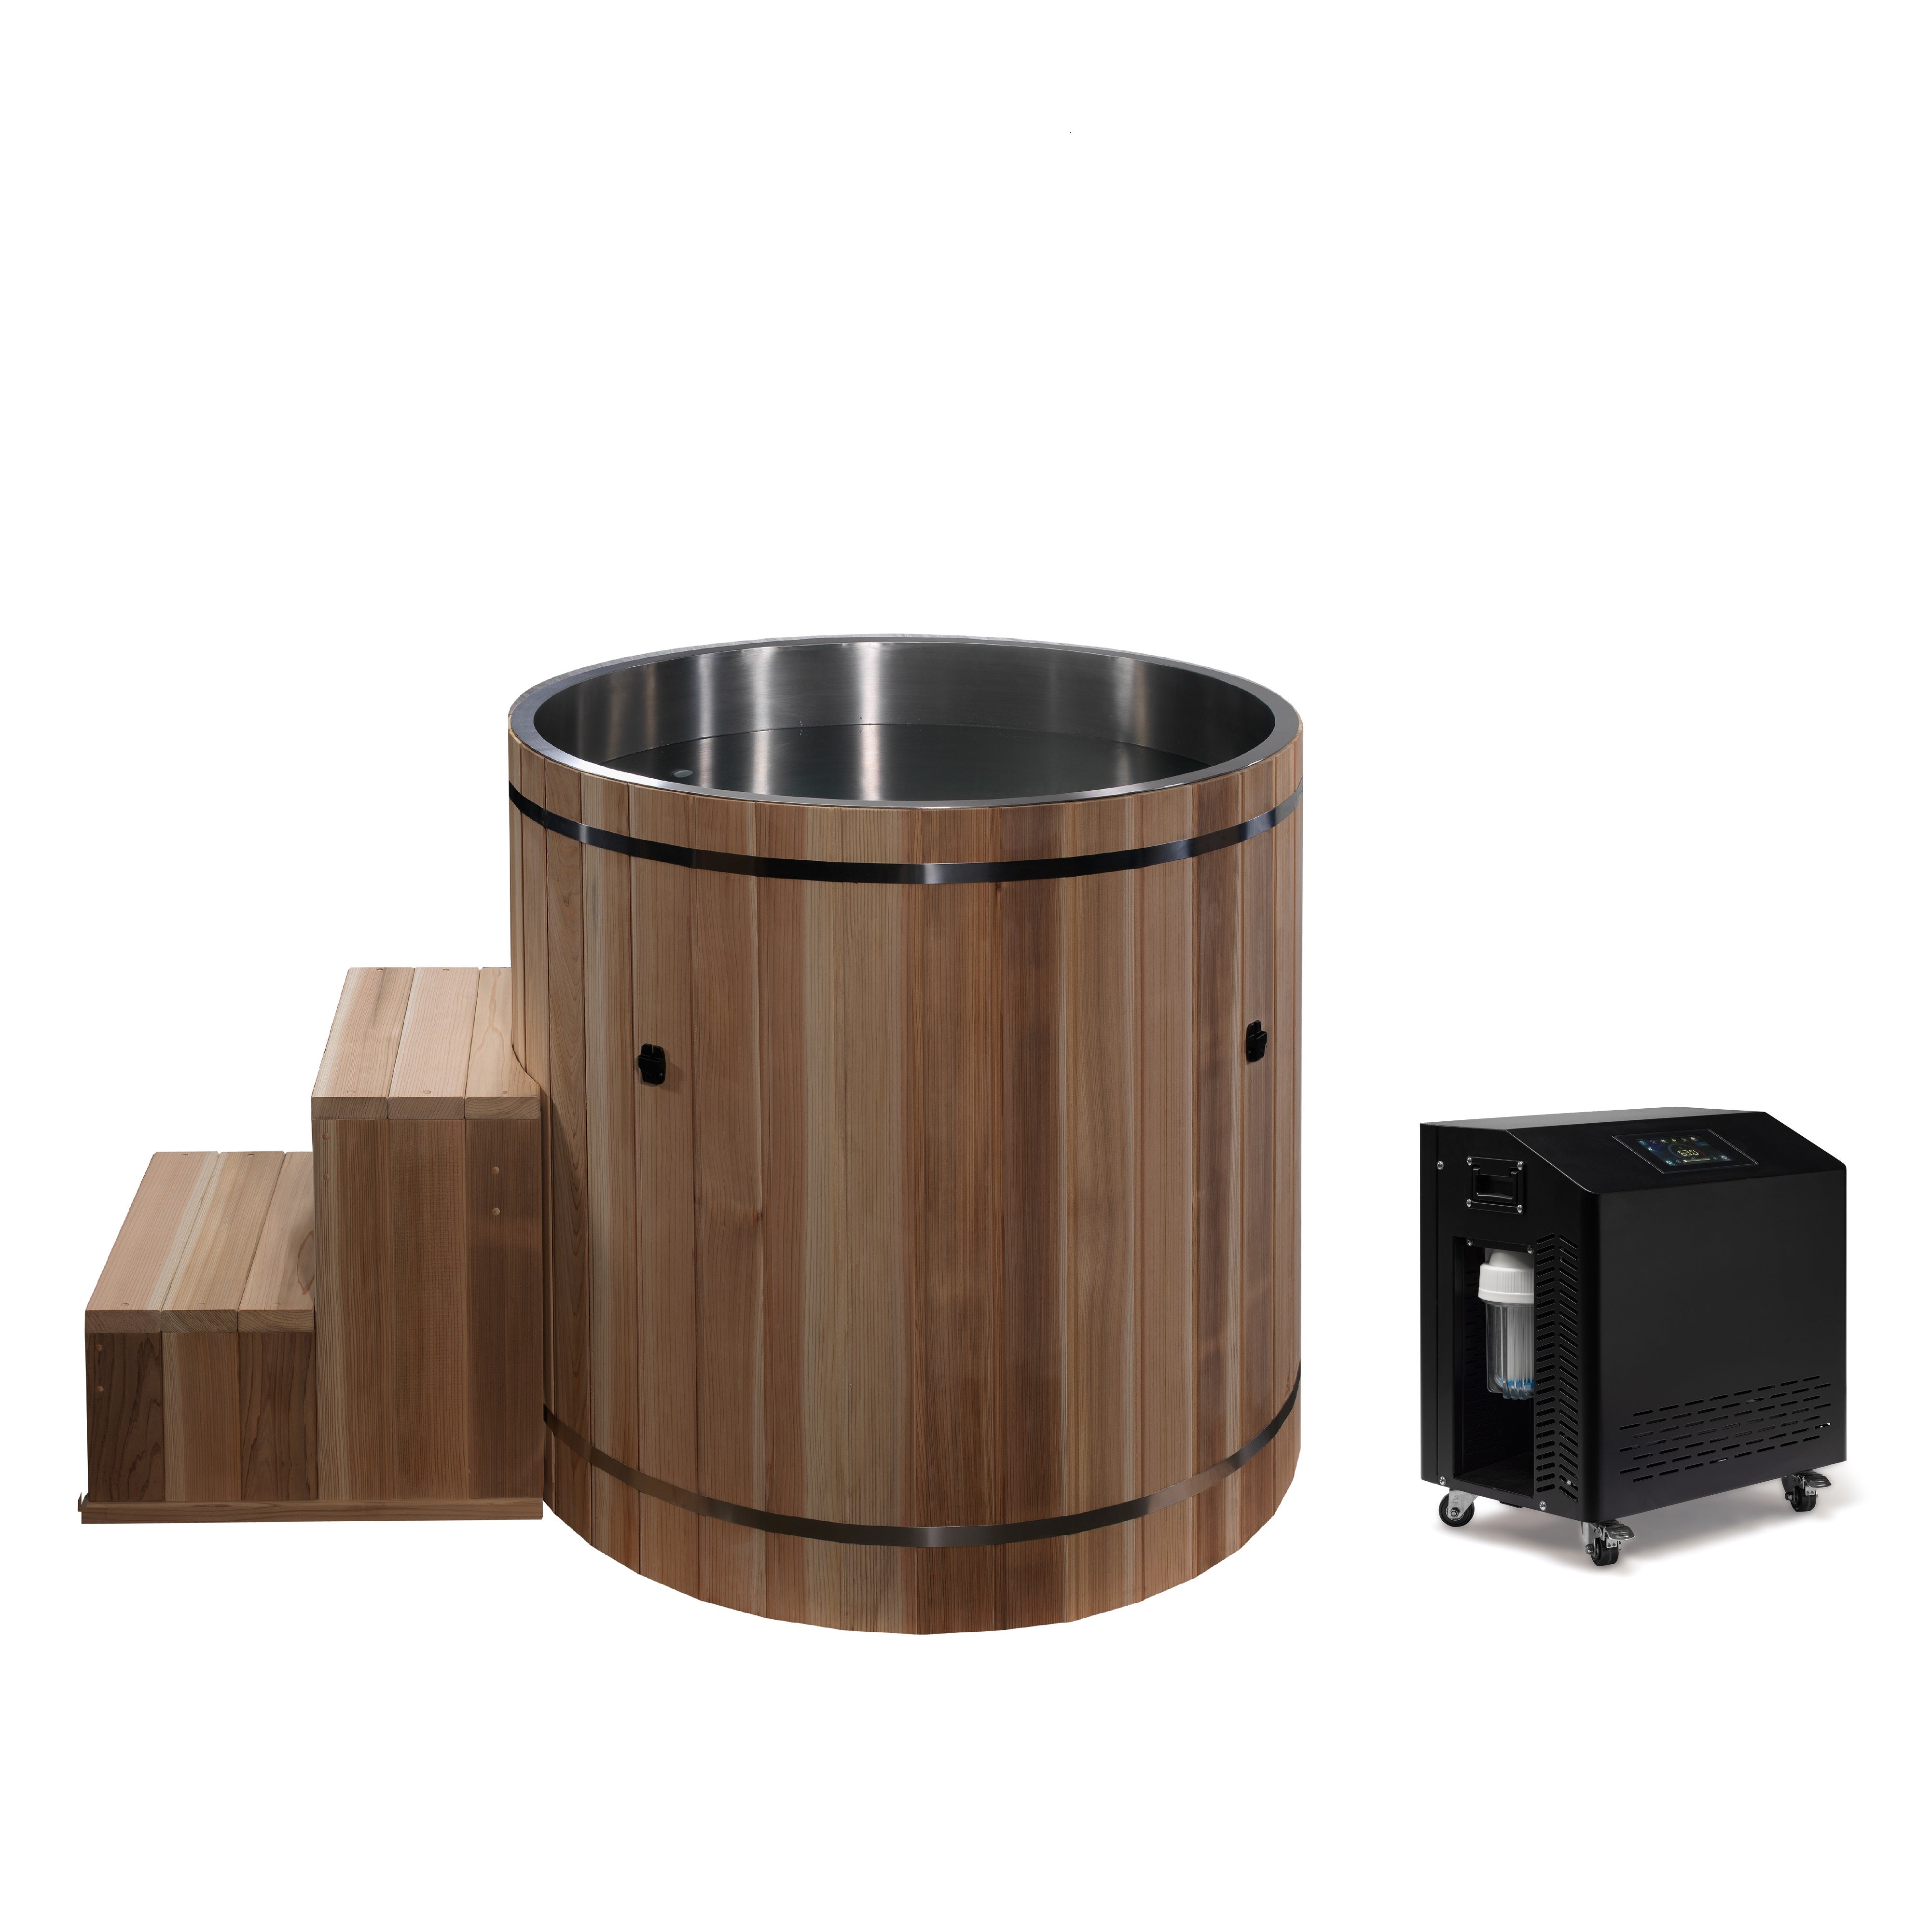 Barrel Cold Plunge/ Ice Bath Stainless Steel with Pacific Cedar Exterior By DCT